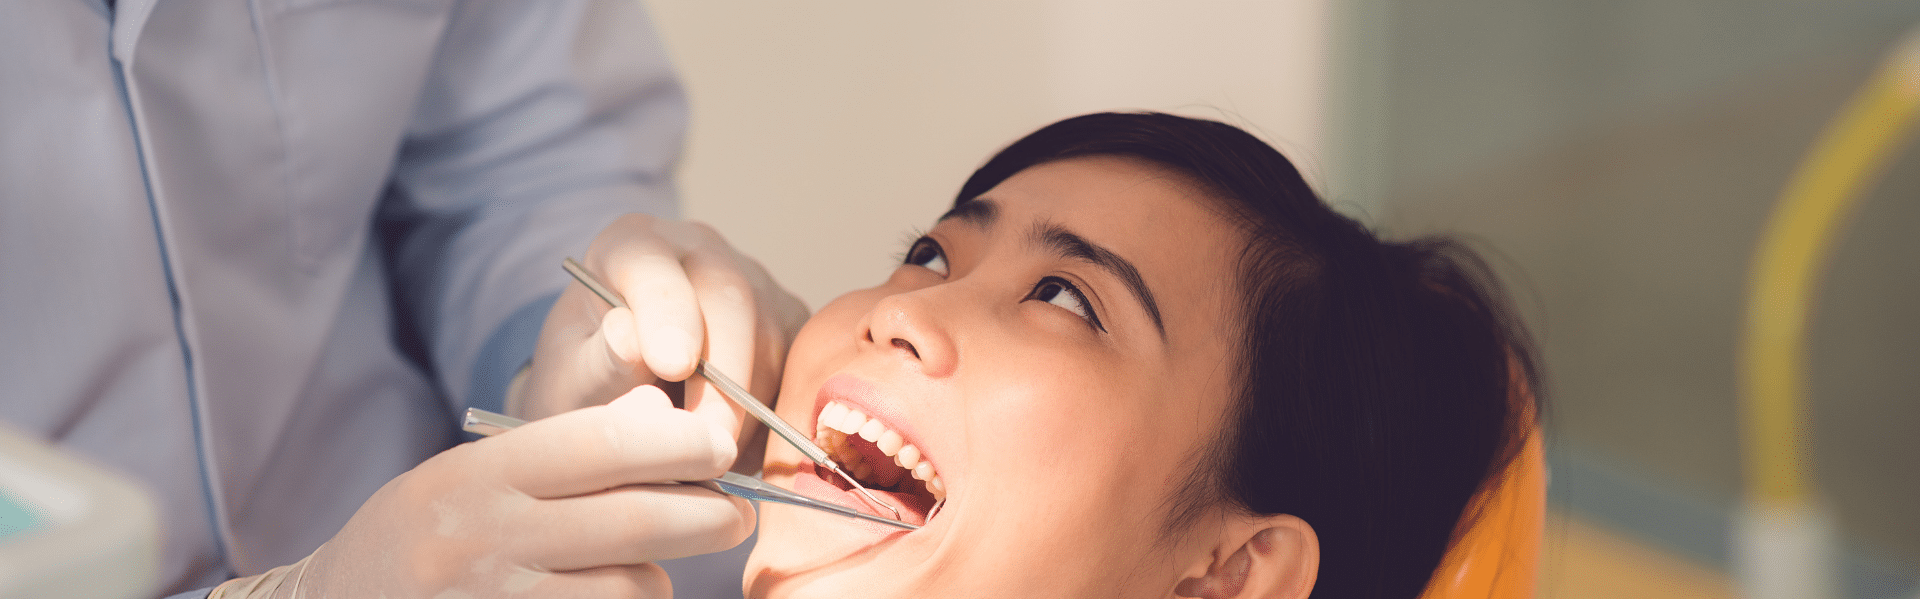 The image shows a dental procedure